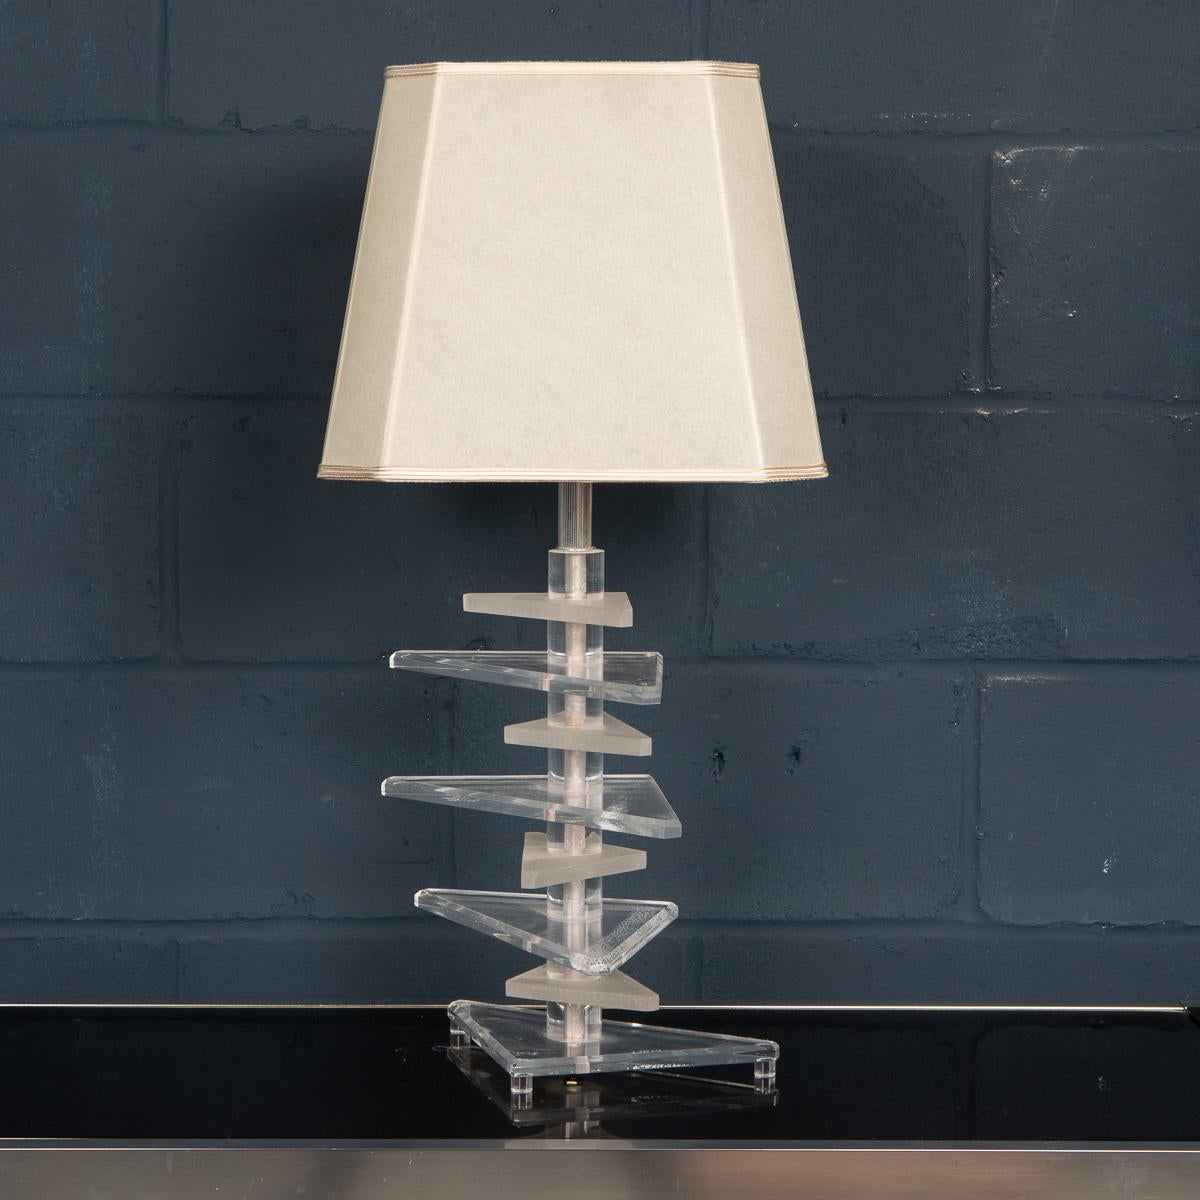 Art Deco Mid-20th Century American Made Stacked Lucite Table Lamps For Sale